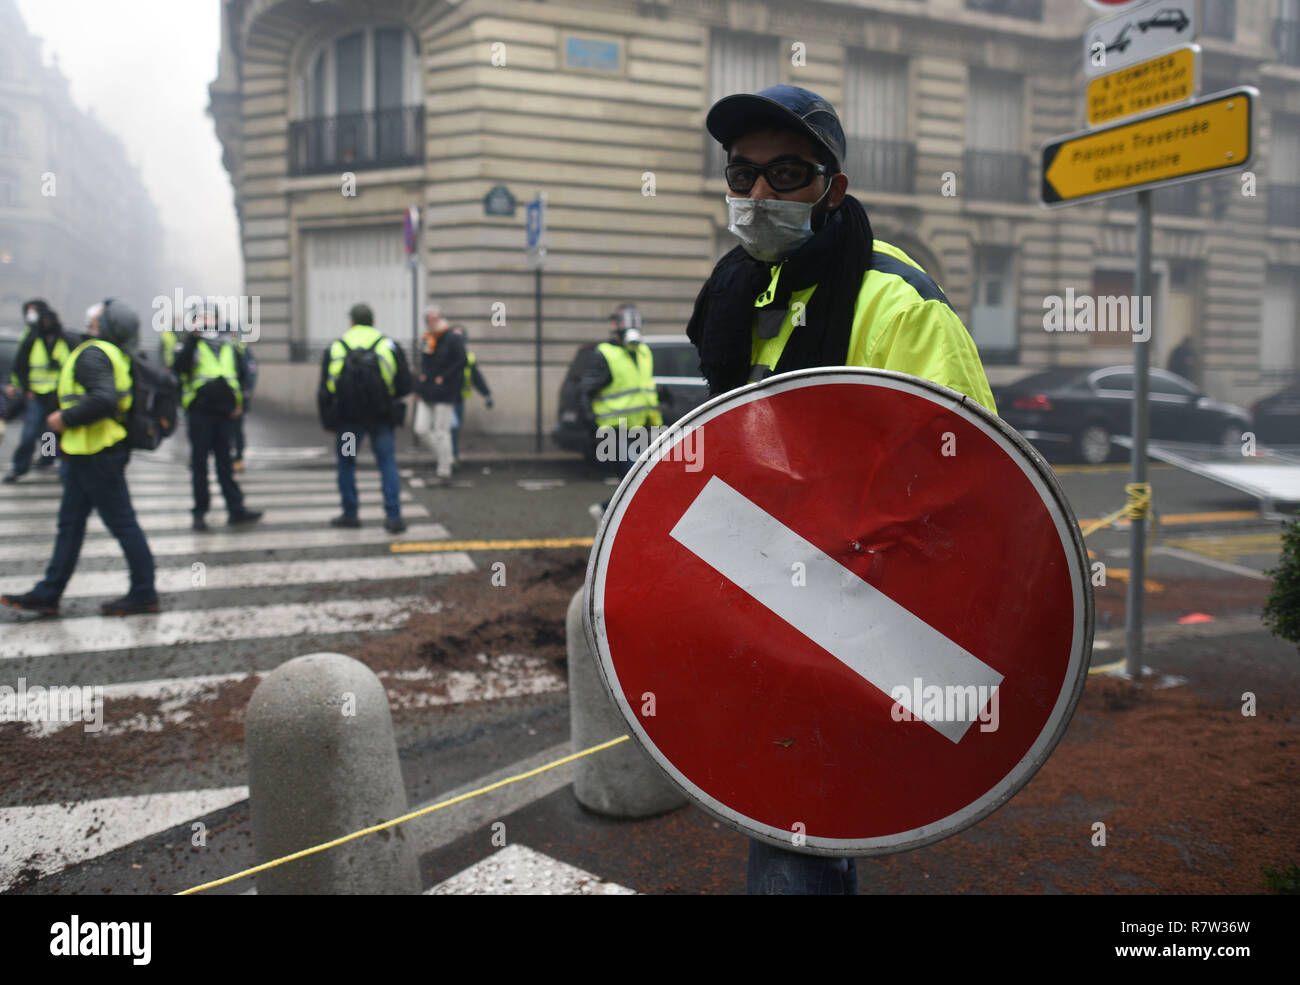 December 01, 2018 - Paris, France: A Yellow vest protester uses a road sign  as a shield in a side street near the Champs-Elysees avenue, where several  vehicles were burnt. Protesters clashed